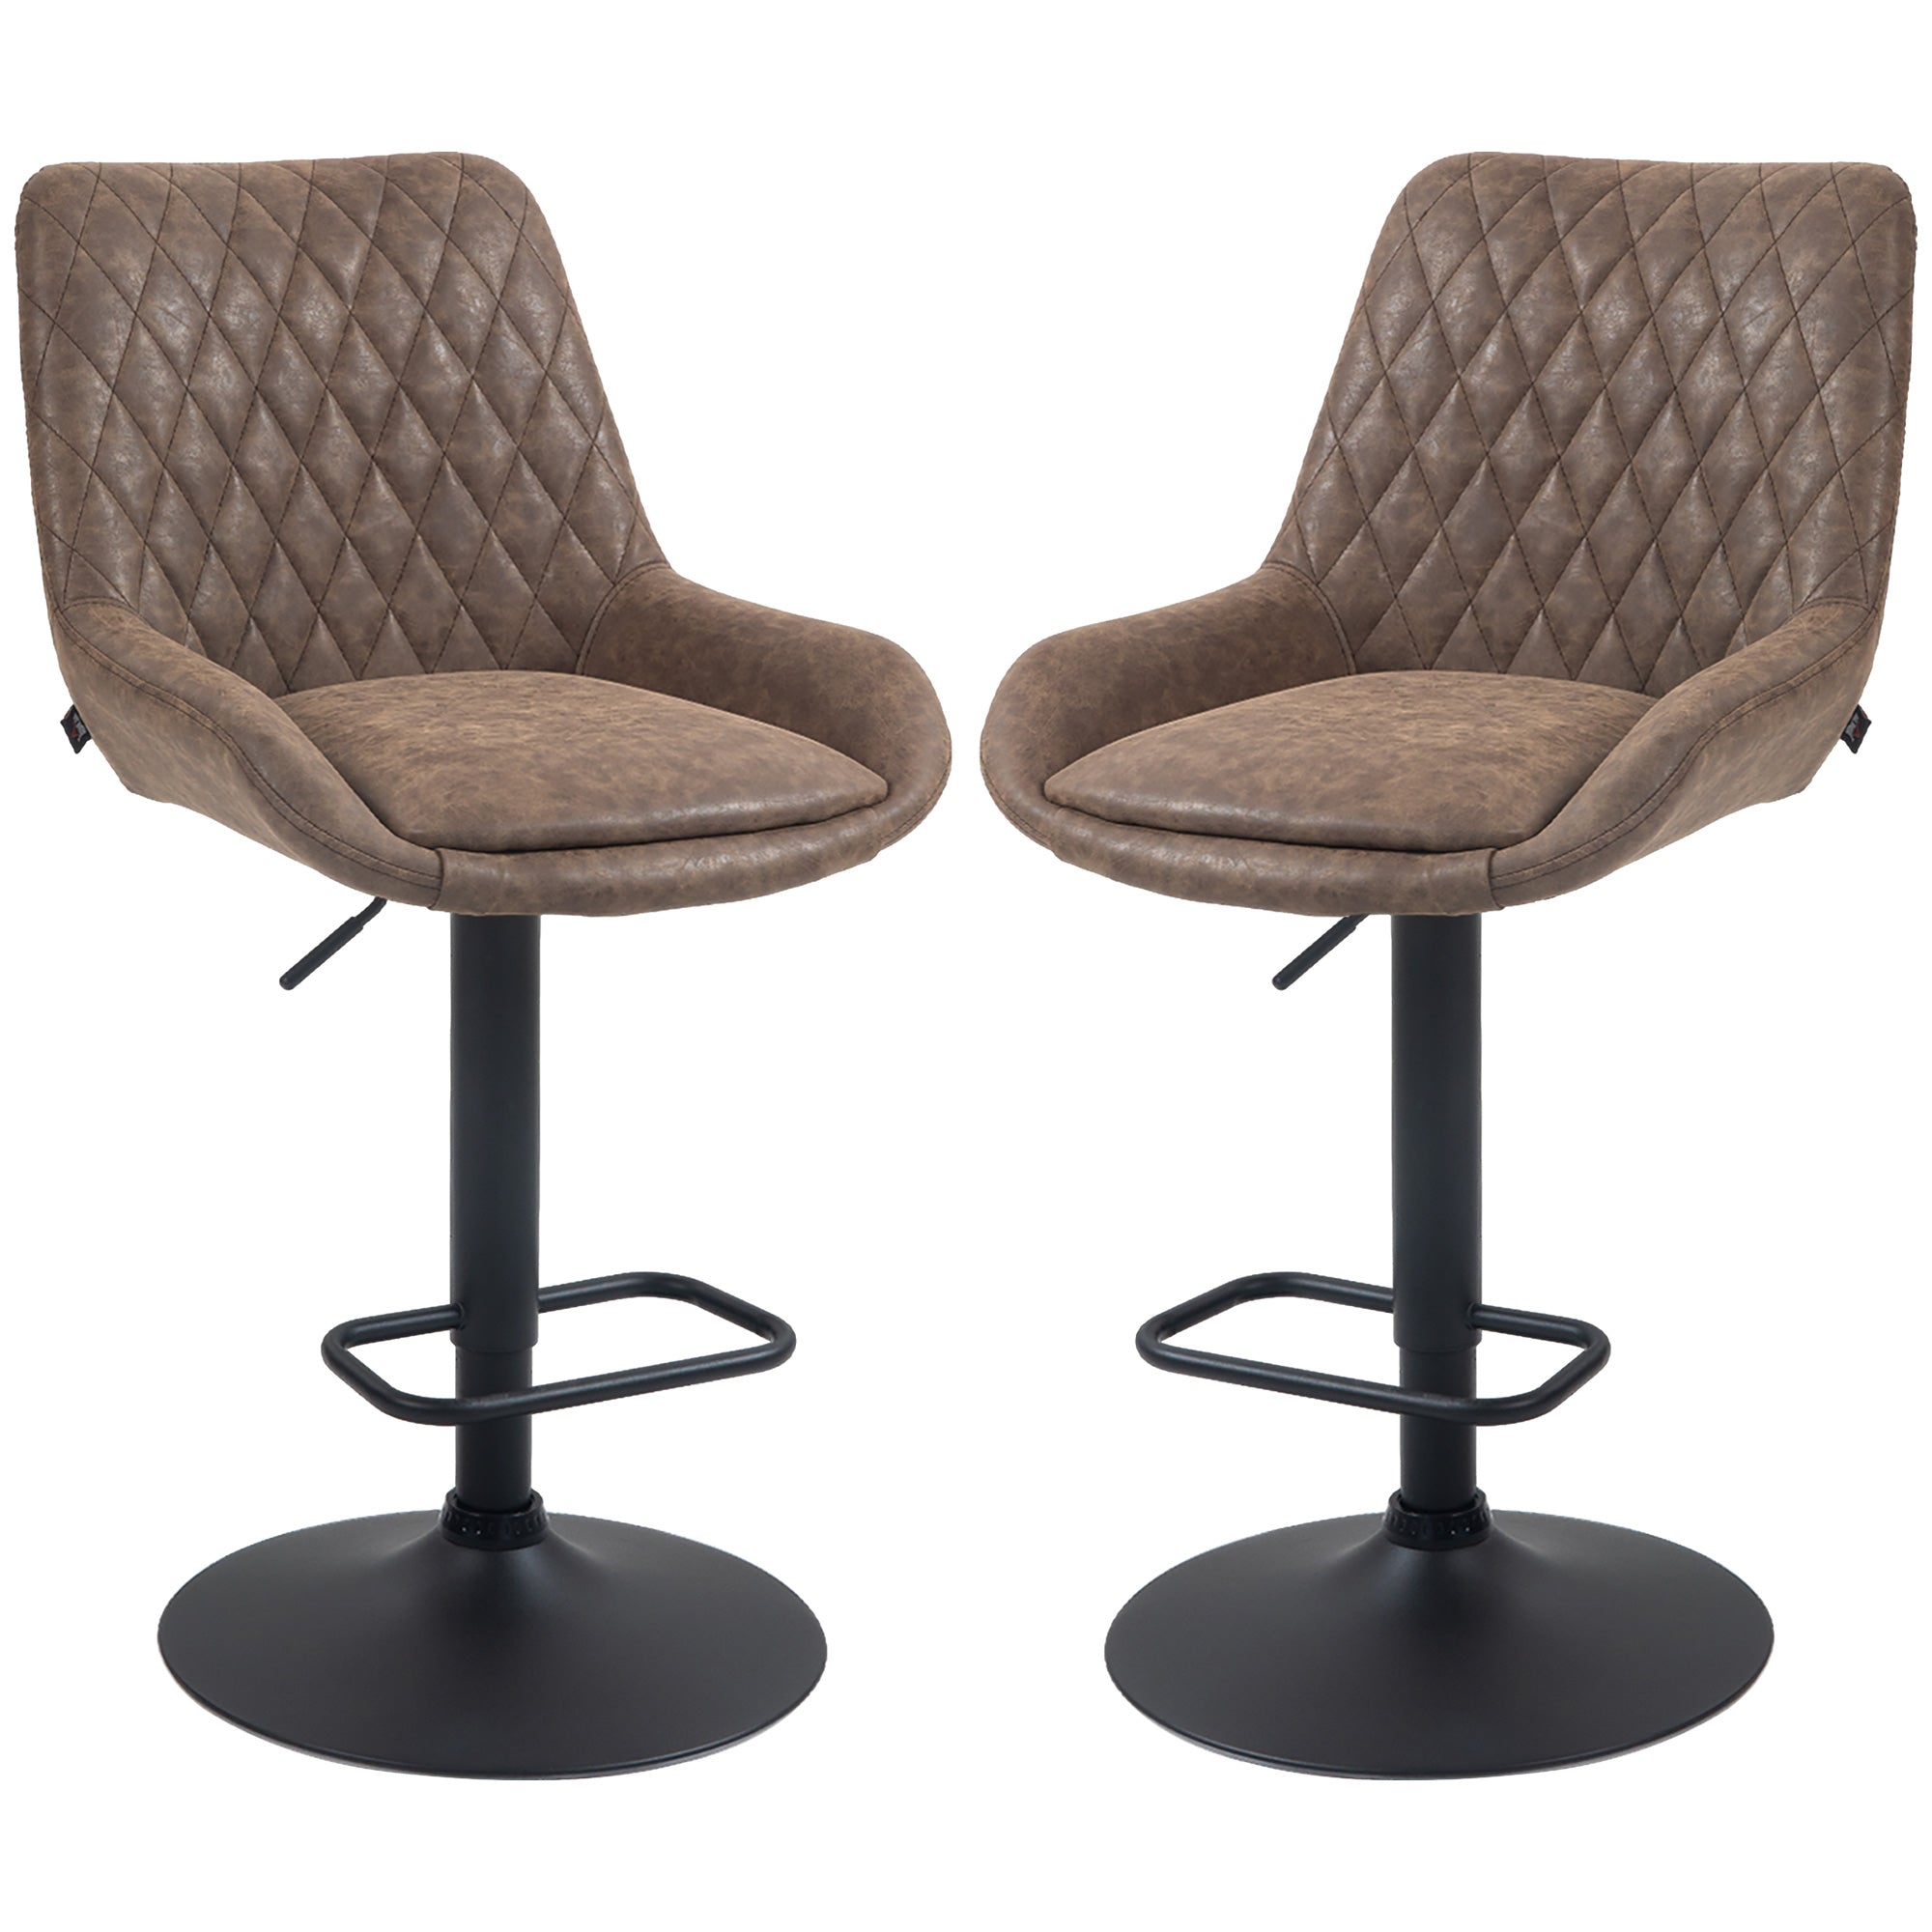 Retro Bar Stools Set of 2, Adjustable Kitchen Stool, Upholstered Bar Chairs with Back, Swivel Seat, Coffee  AOSOM   